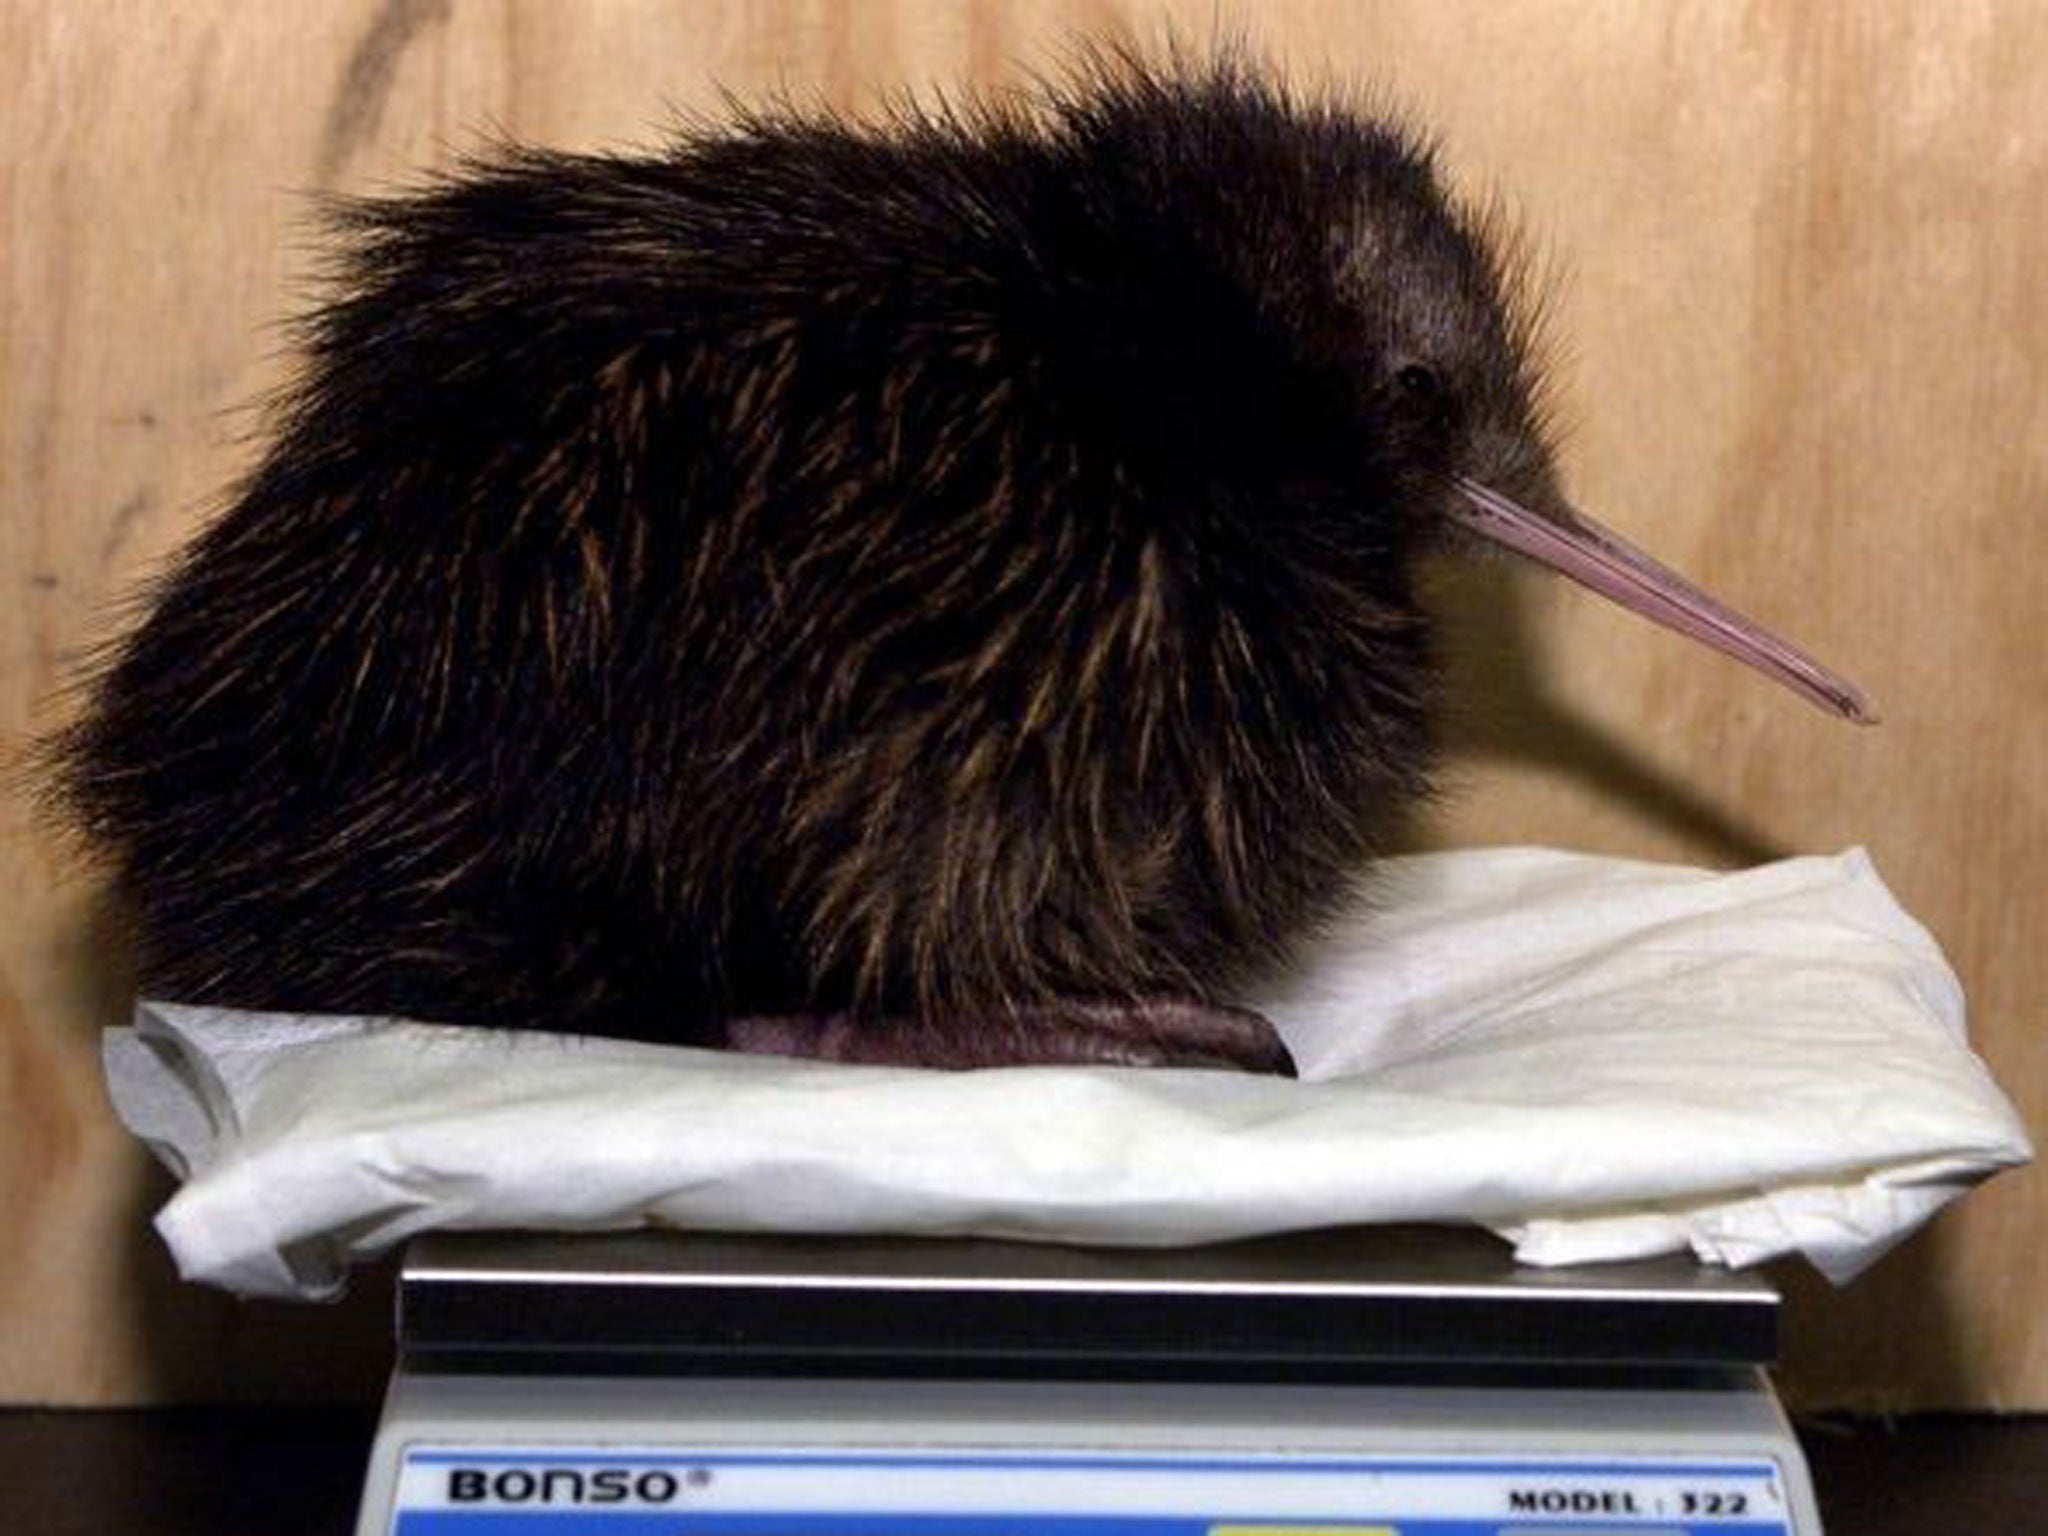 File: In findings that could be a bitter blow for many New Zealanders, researchers have found the country's iconic kiwi bird probably descended from an ancestor that flew in from Australia